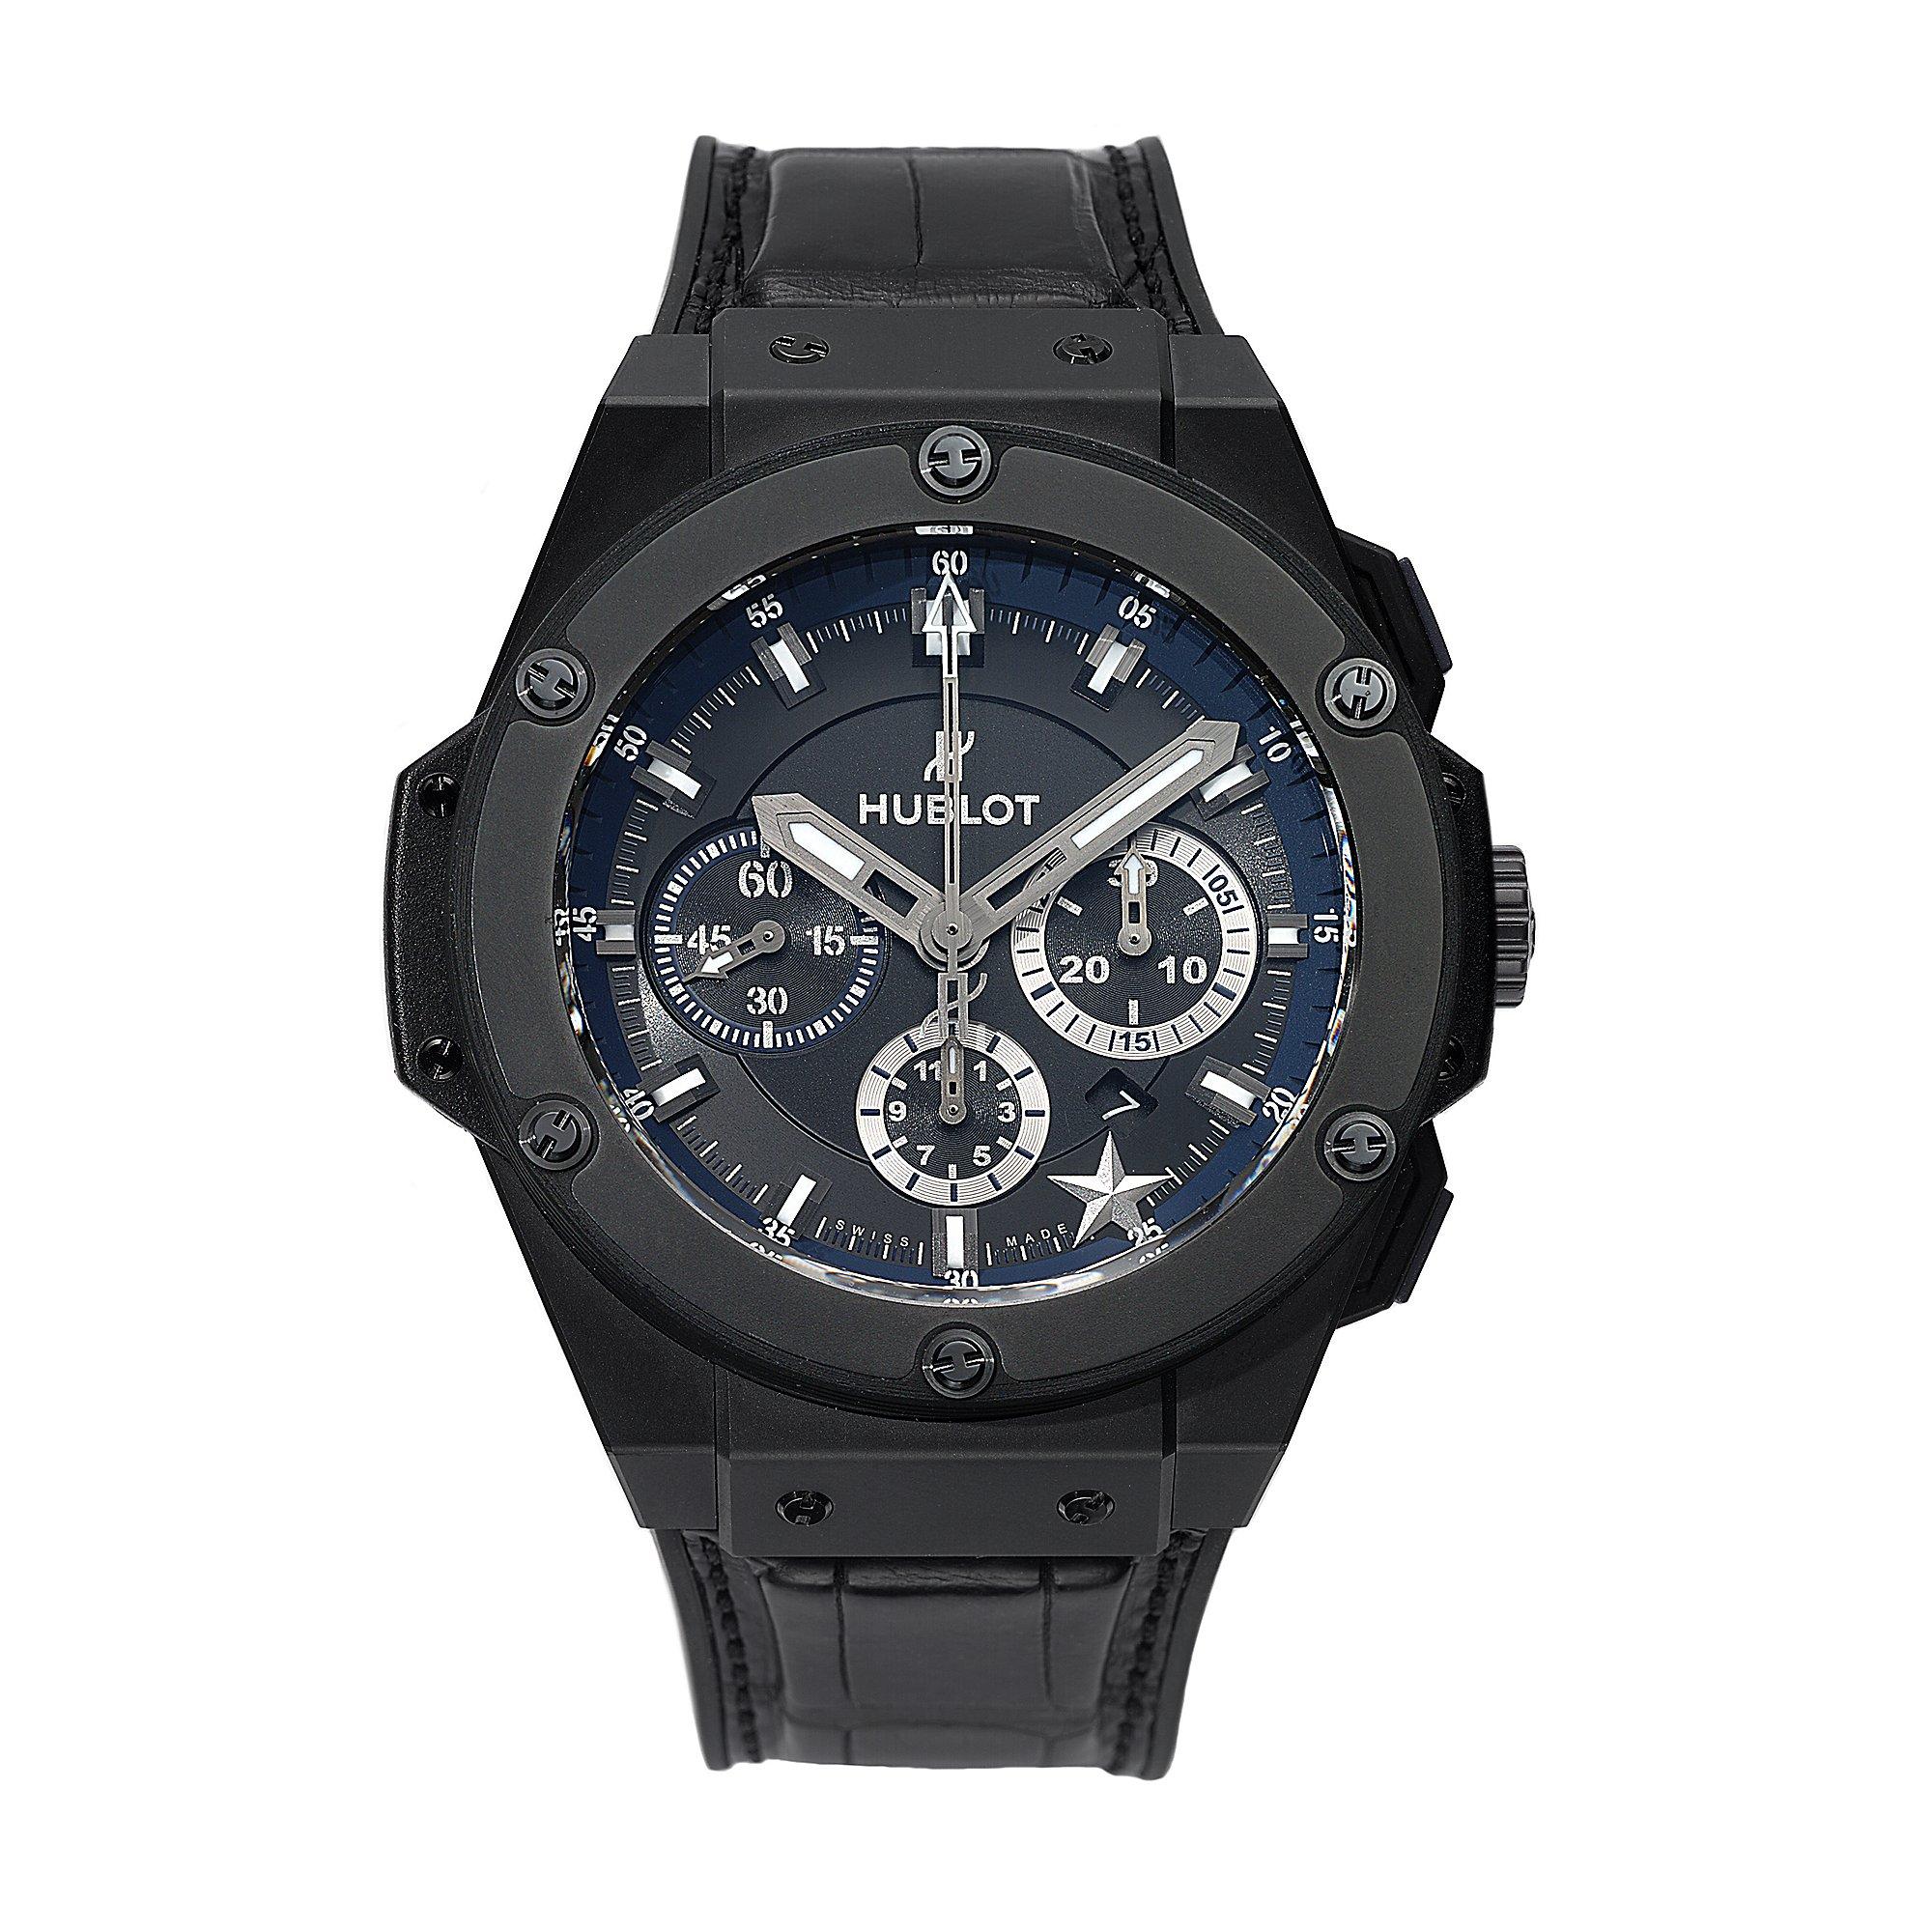 HUBLOT'S SPECIAL EDITION DALLAS COWBOYS KING POWER WATCH.
*ONLY 50 PIECES WORLDWIDE.

Mint Condition Pre-Owned Wristwatch with Box, No Papers.

PRODUCT DETAILS

Let the Dallas Cowboys Hublot King Power 48mm Watch do your timekeeping for you. With